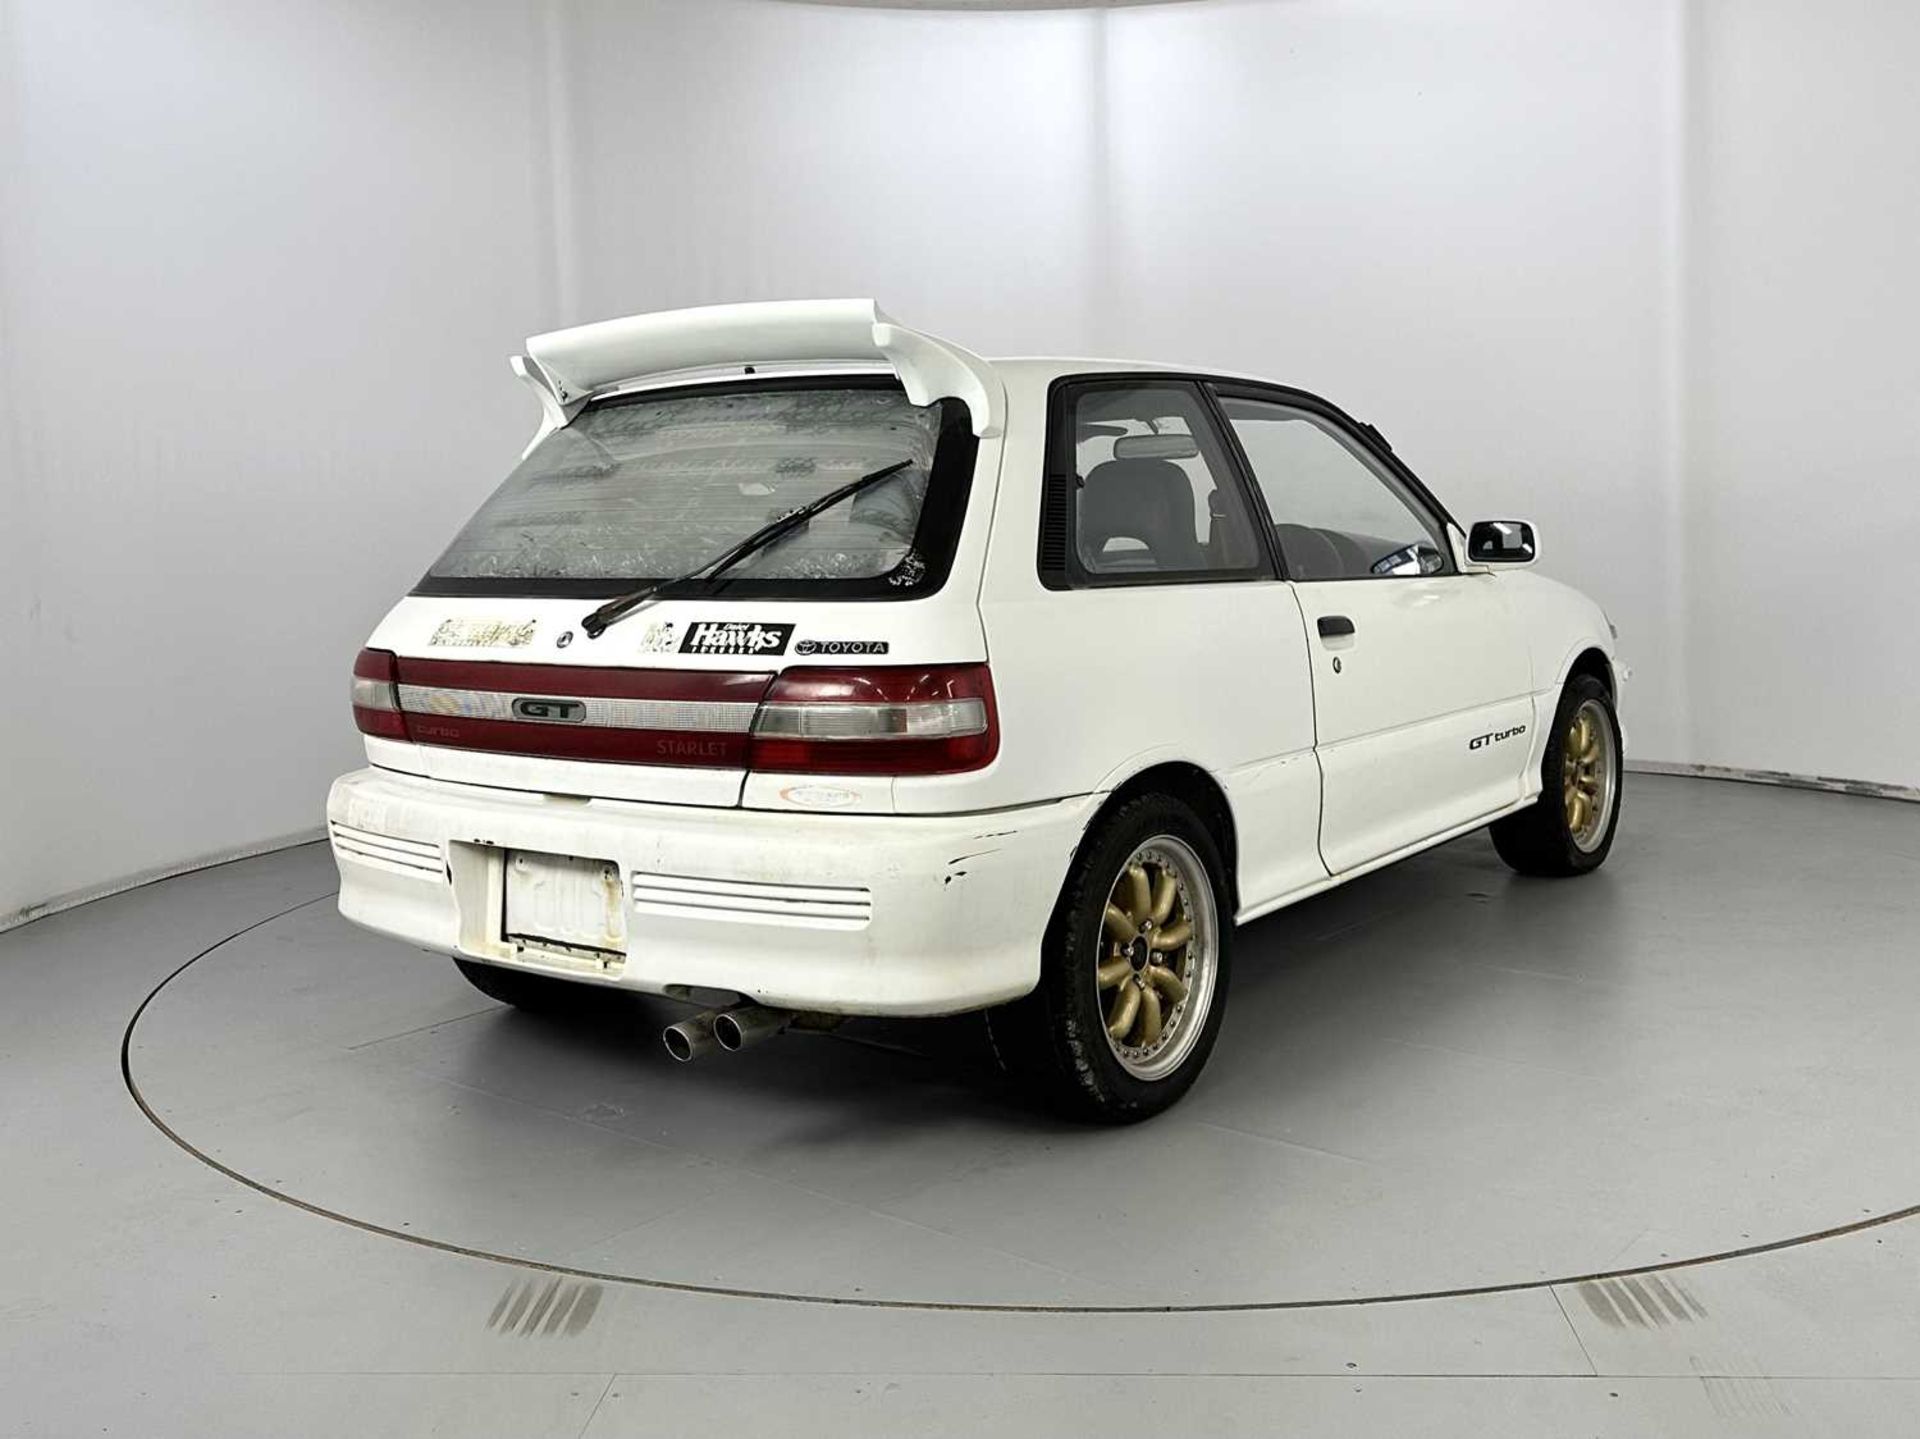 1990 Toyota Starlet GT Turbo - Image 9 of 29